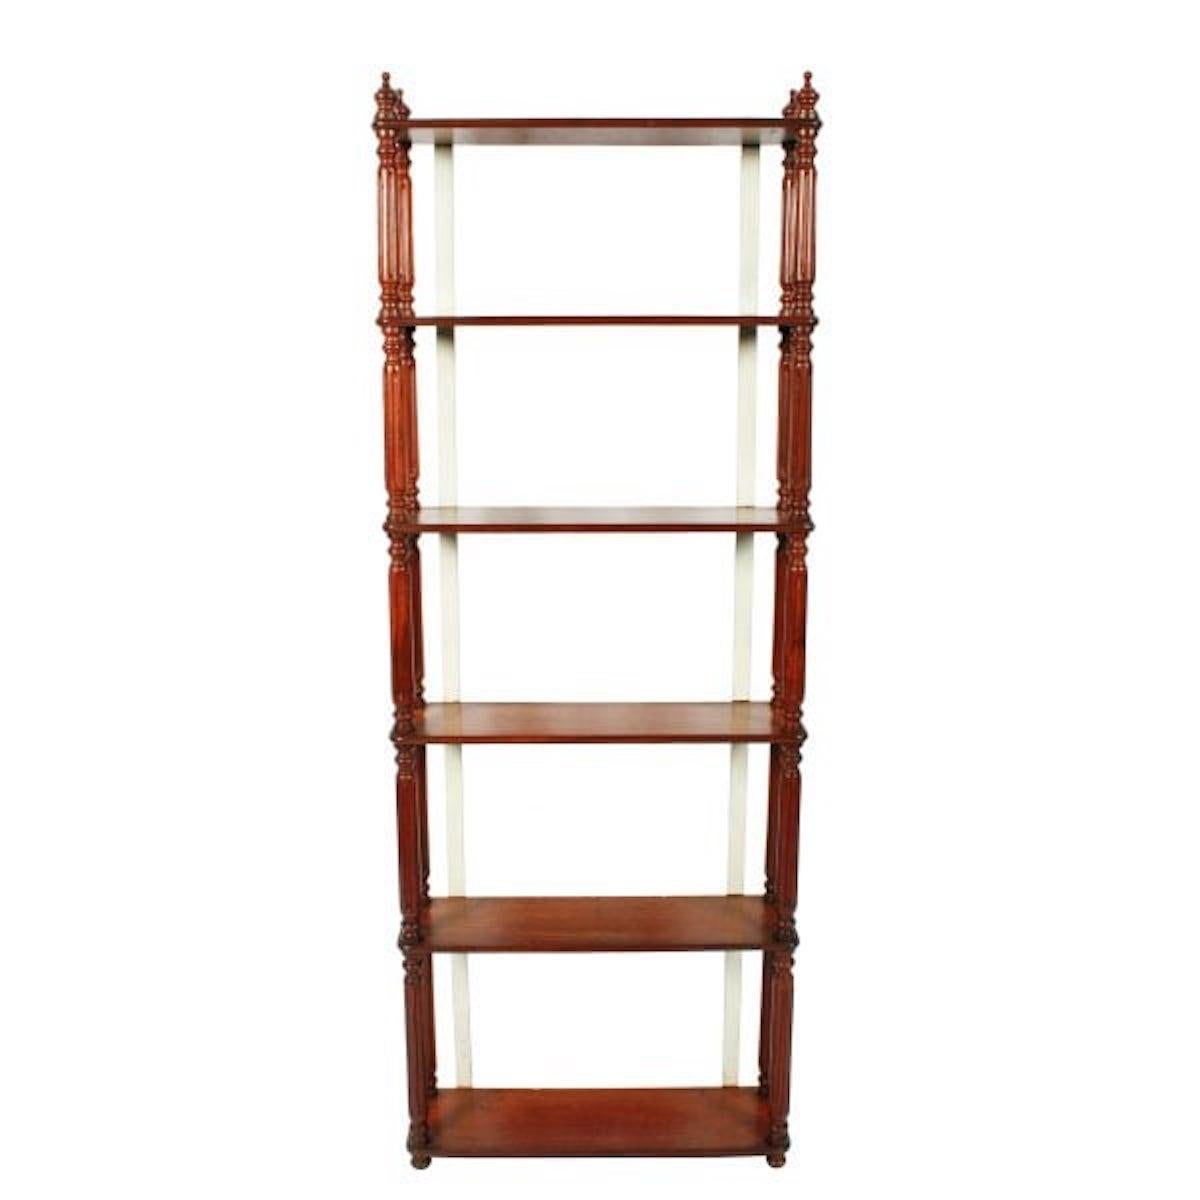 Tall Victorian wall shelves

A set of tall 19th century Victorian mahogany wall hanging shelves.

The six oblong shelves have half round moulded edges and turned and fluted pillar supports, the top and bottom shelves have decorative turned